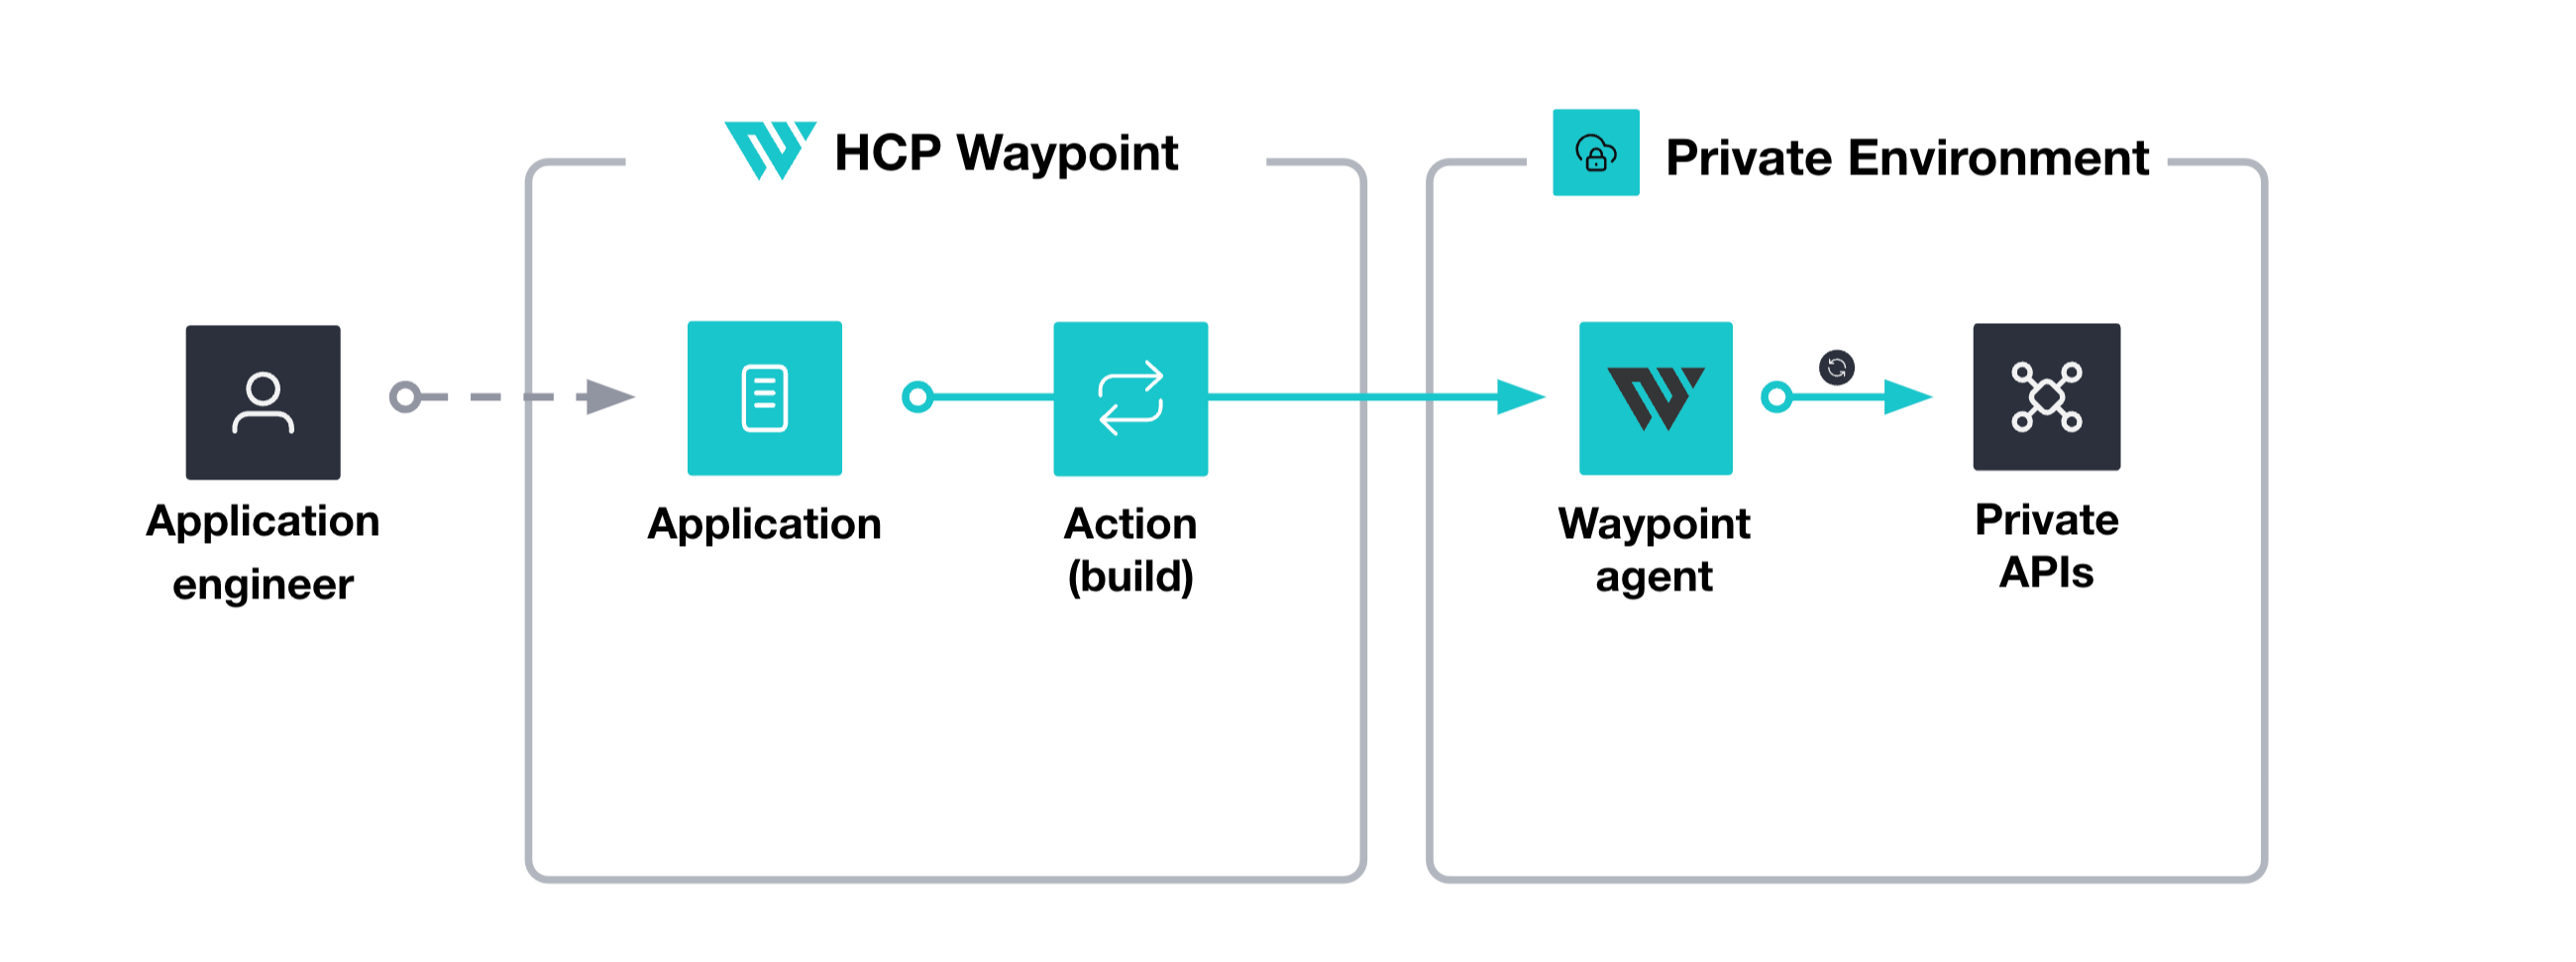 HCP Waypoint agent running in a private environment to securely execute an HCP Waypoint action